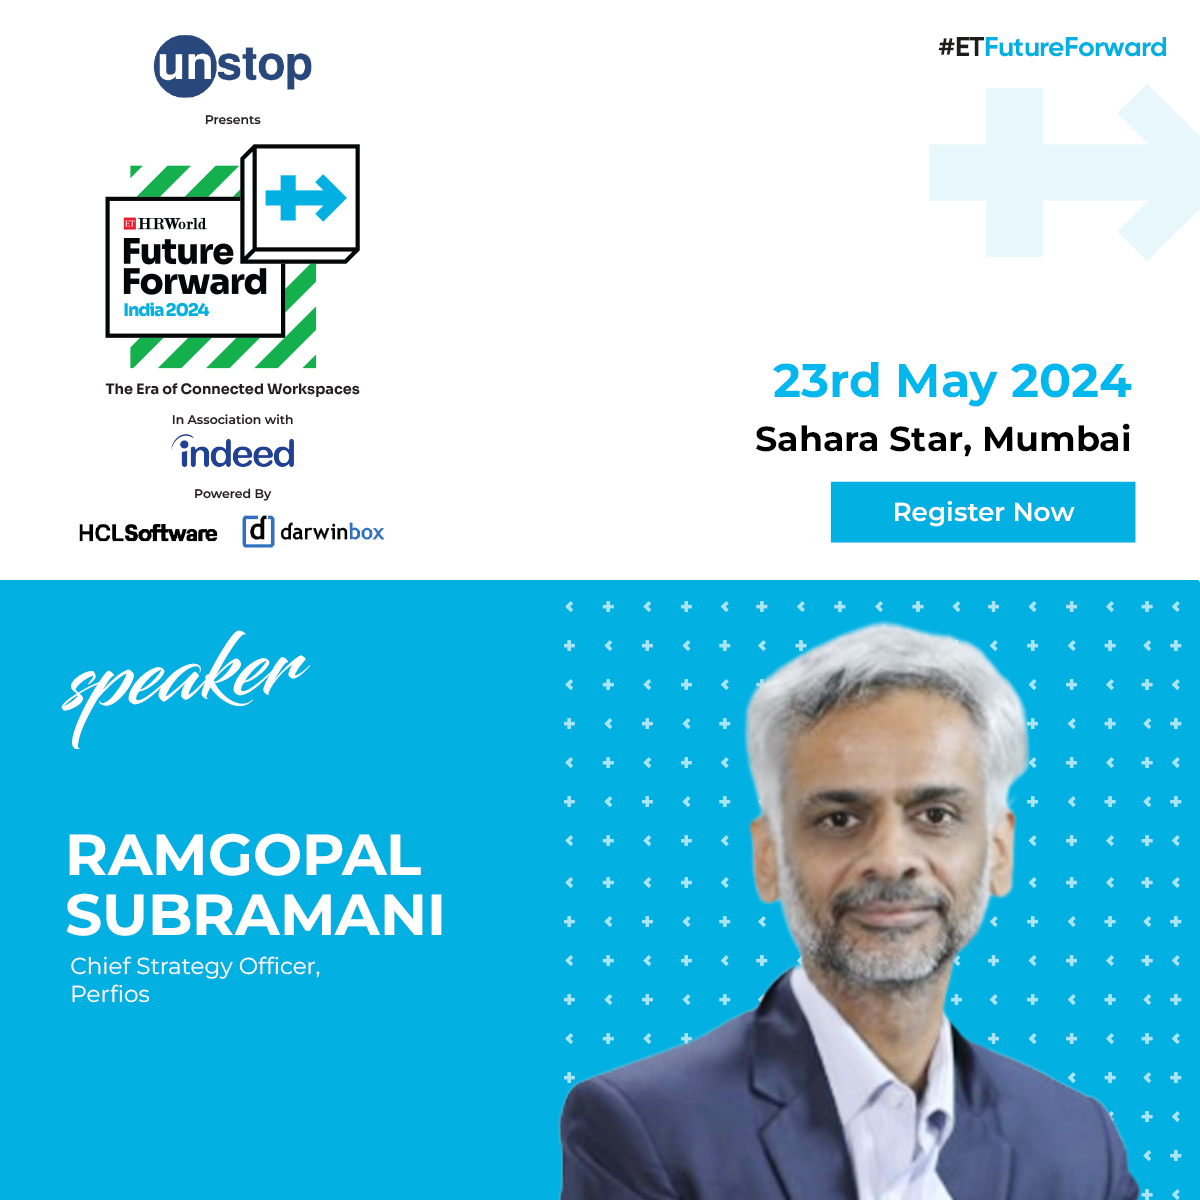 Join us in welcoming Ramgopal Subramani, Chief Strategy Officer, @Perfios to #ETFutureForward 2024!

Join us for an inspiring journey into the future of work!

Register Now: bit.ly/49oakZp

#ETHRWorld #EconomicTimes #Summit #HR #FutureOfWork #WorkplaceTransformation